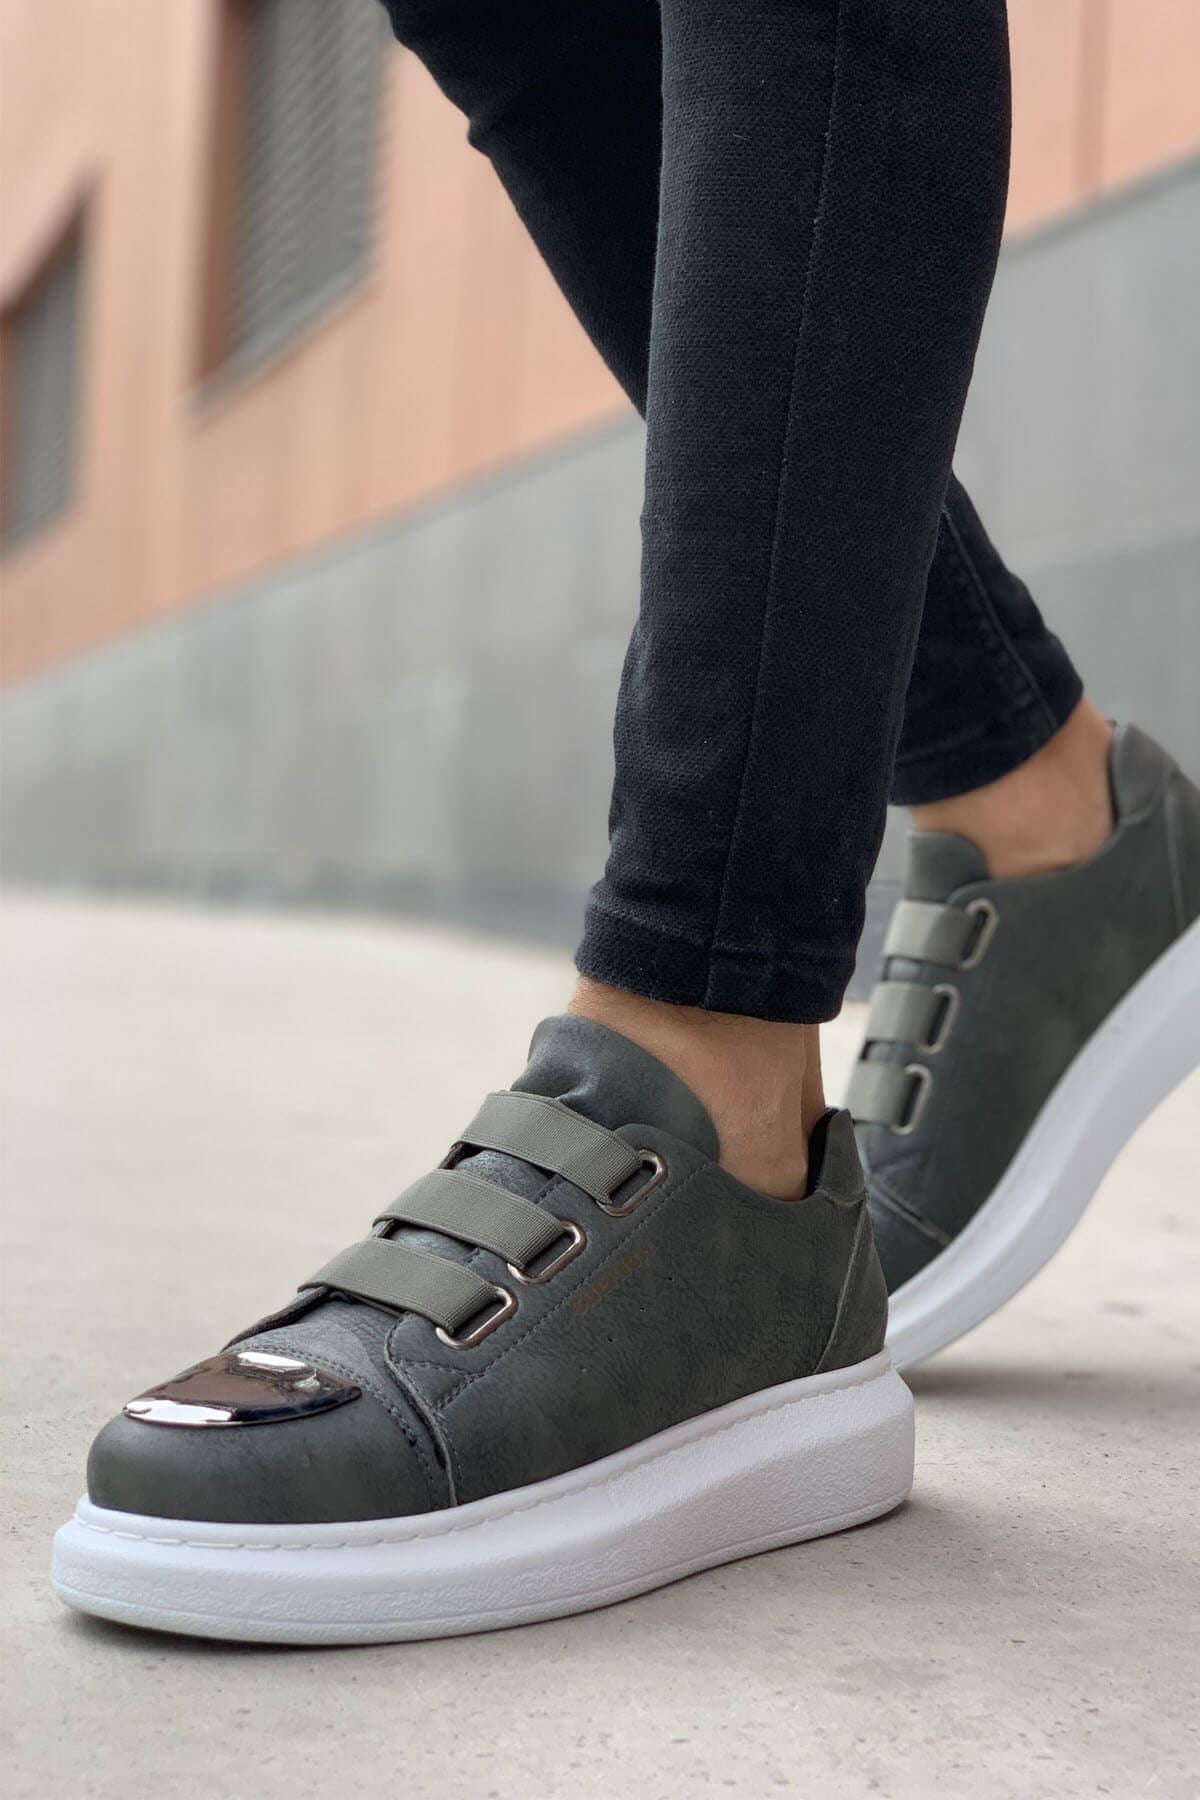 Original Design CH251 Unisex Grey-New Trend Shiny Accessory Casual Sneaker Sports Shoes - STREETMODE™